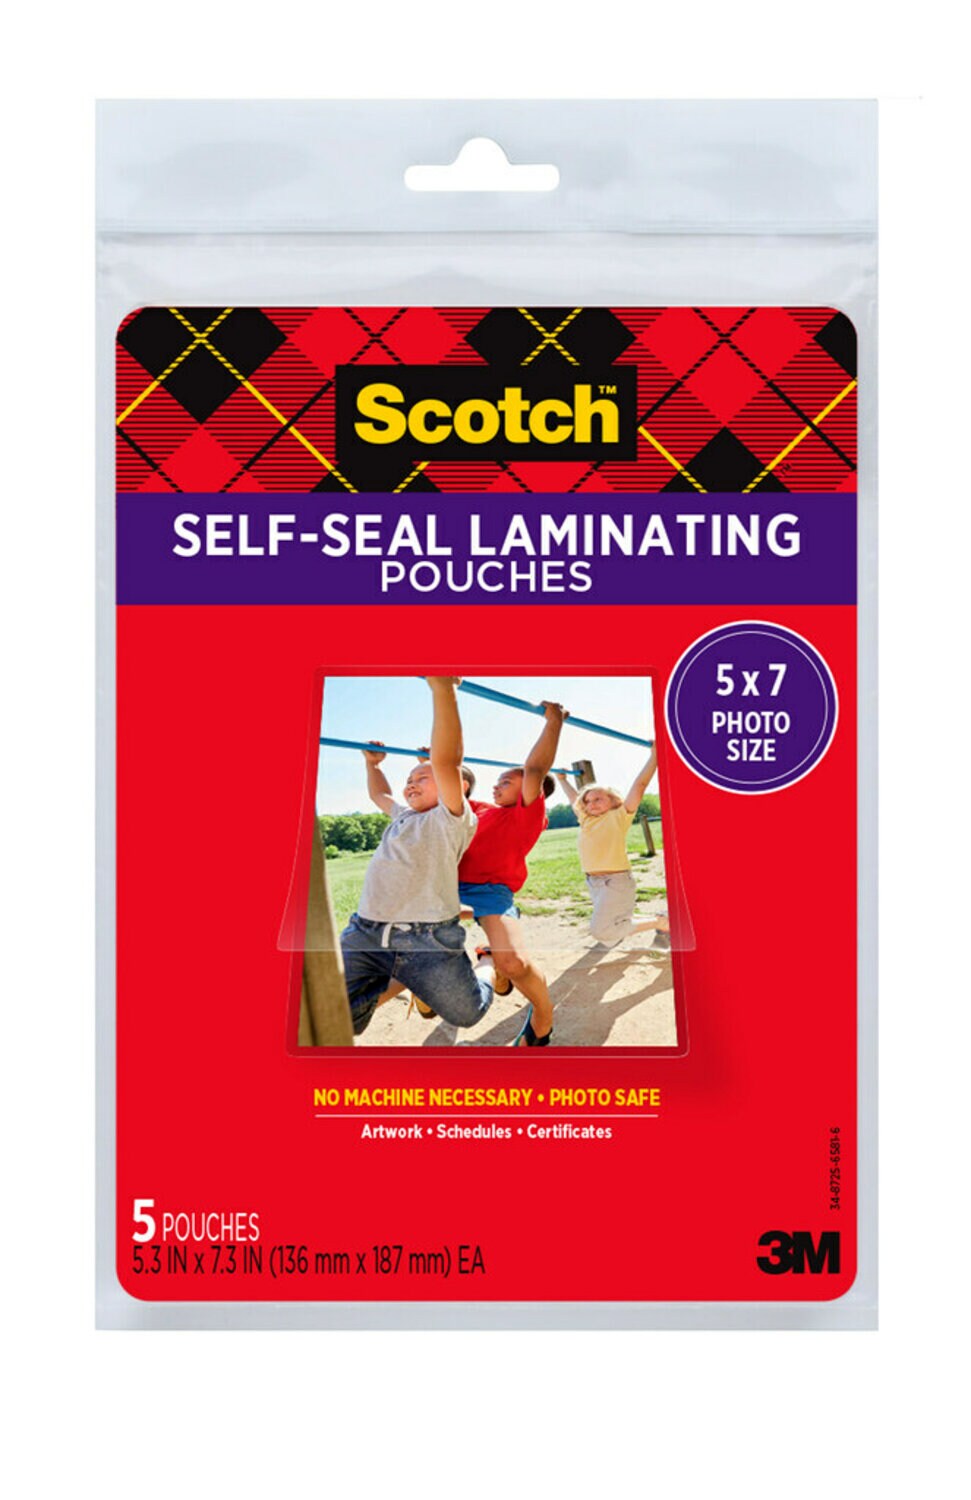 7100240584 - PL905-SR Scotch  Self-Sealing Laminating Pouches, 5.3 in x 7.3 in (136 mm x 187 mm) Gloss Finish 5 x 7